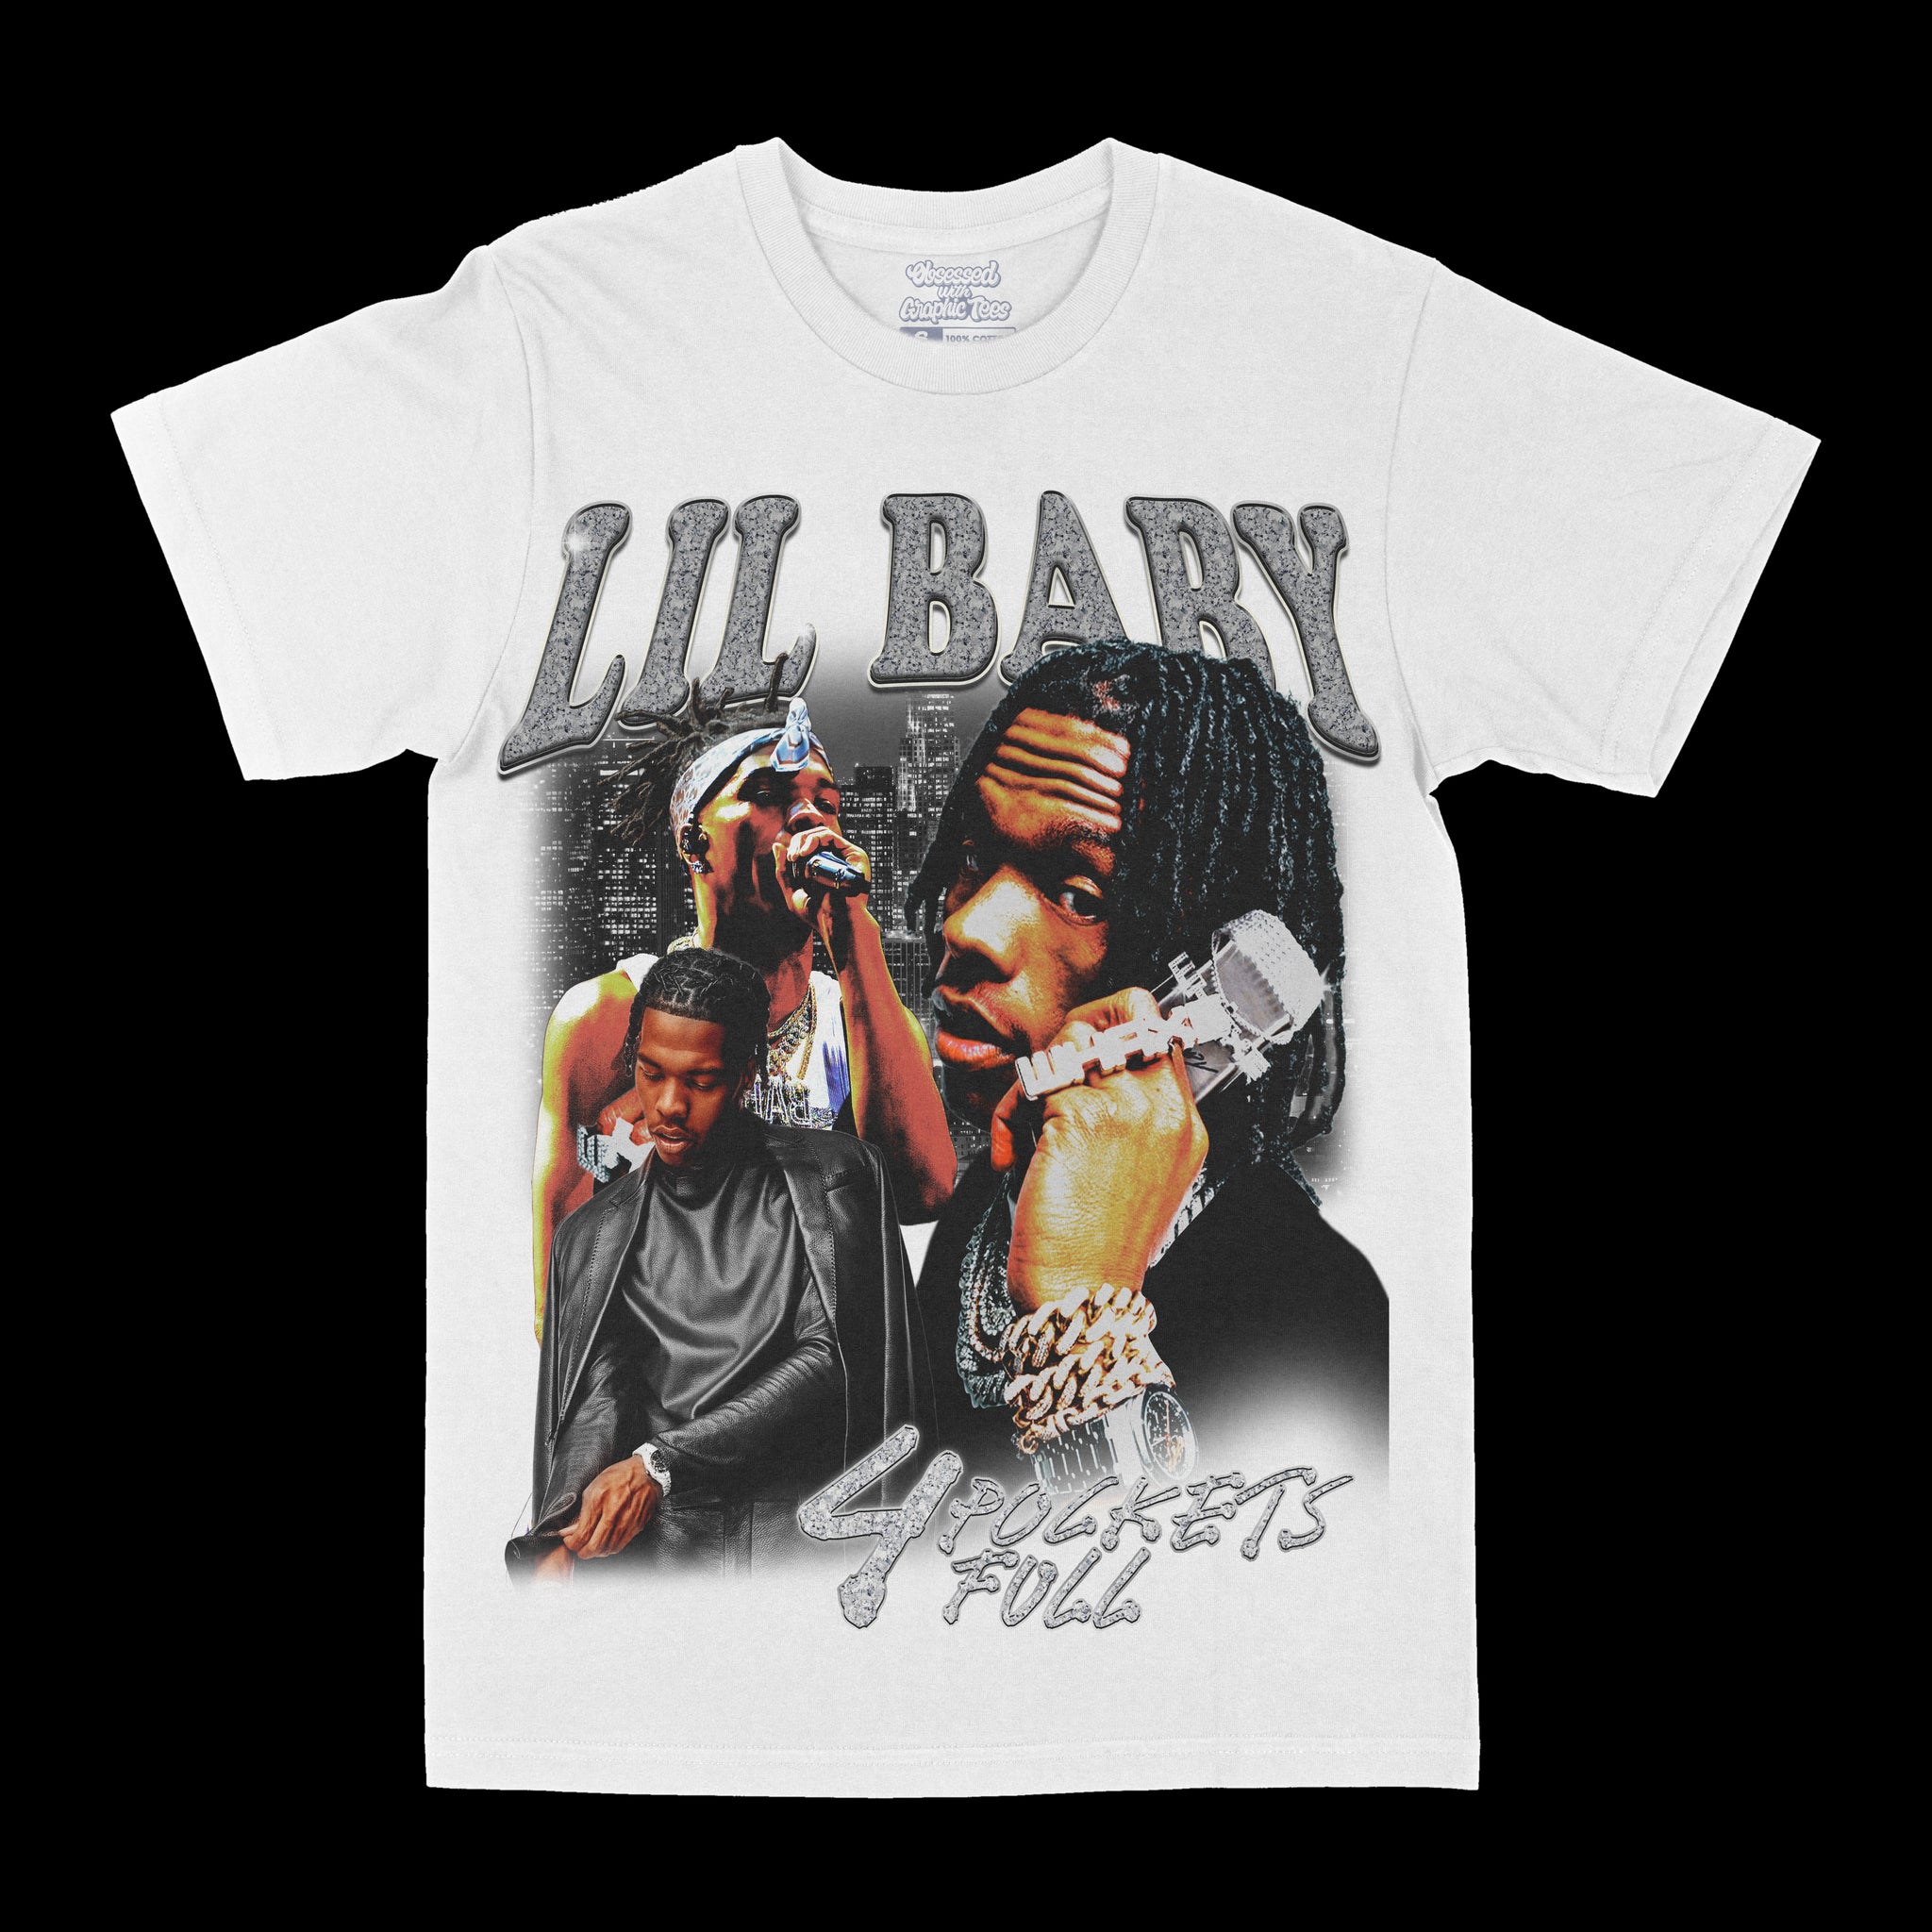 Lil Baby "4 Pockets Full" Graphic Tee